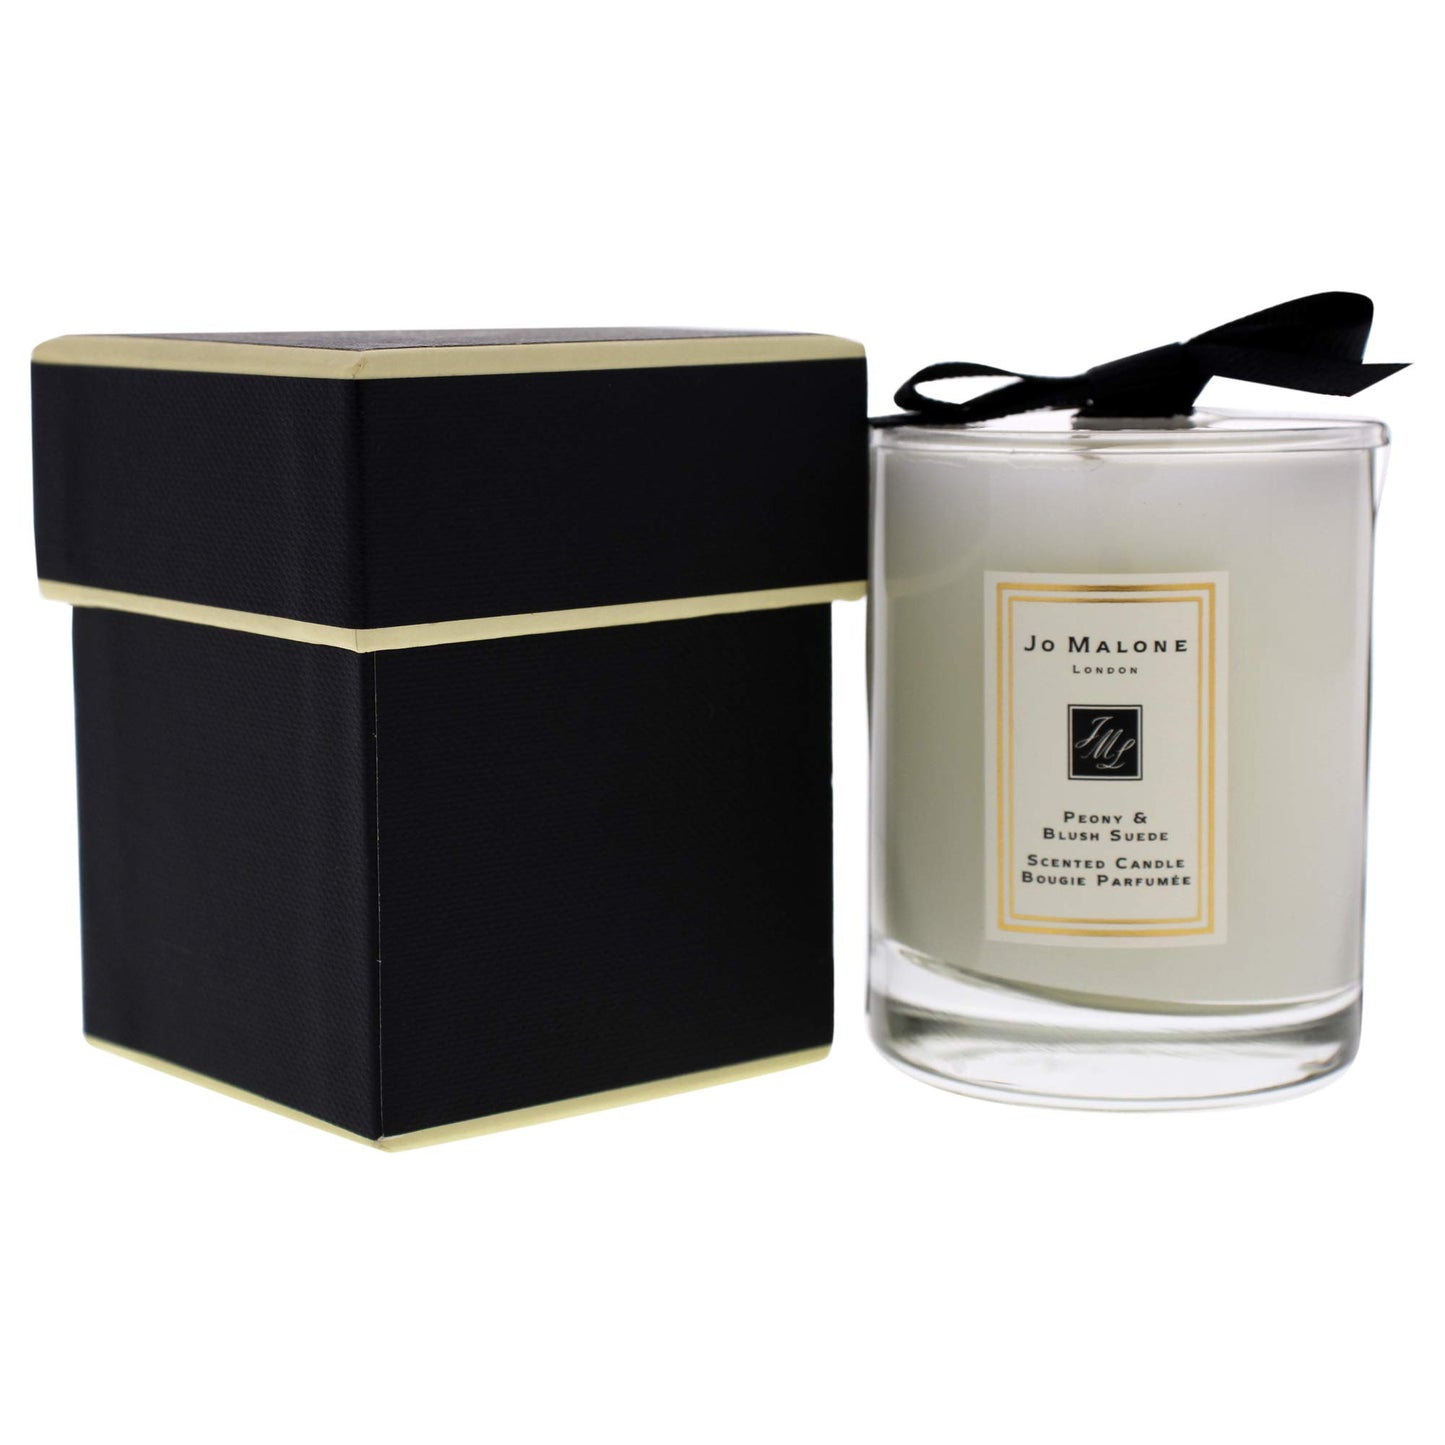 Jo Malone Peony and Blush Suede Scented Candle/2 oz.